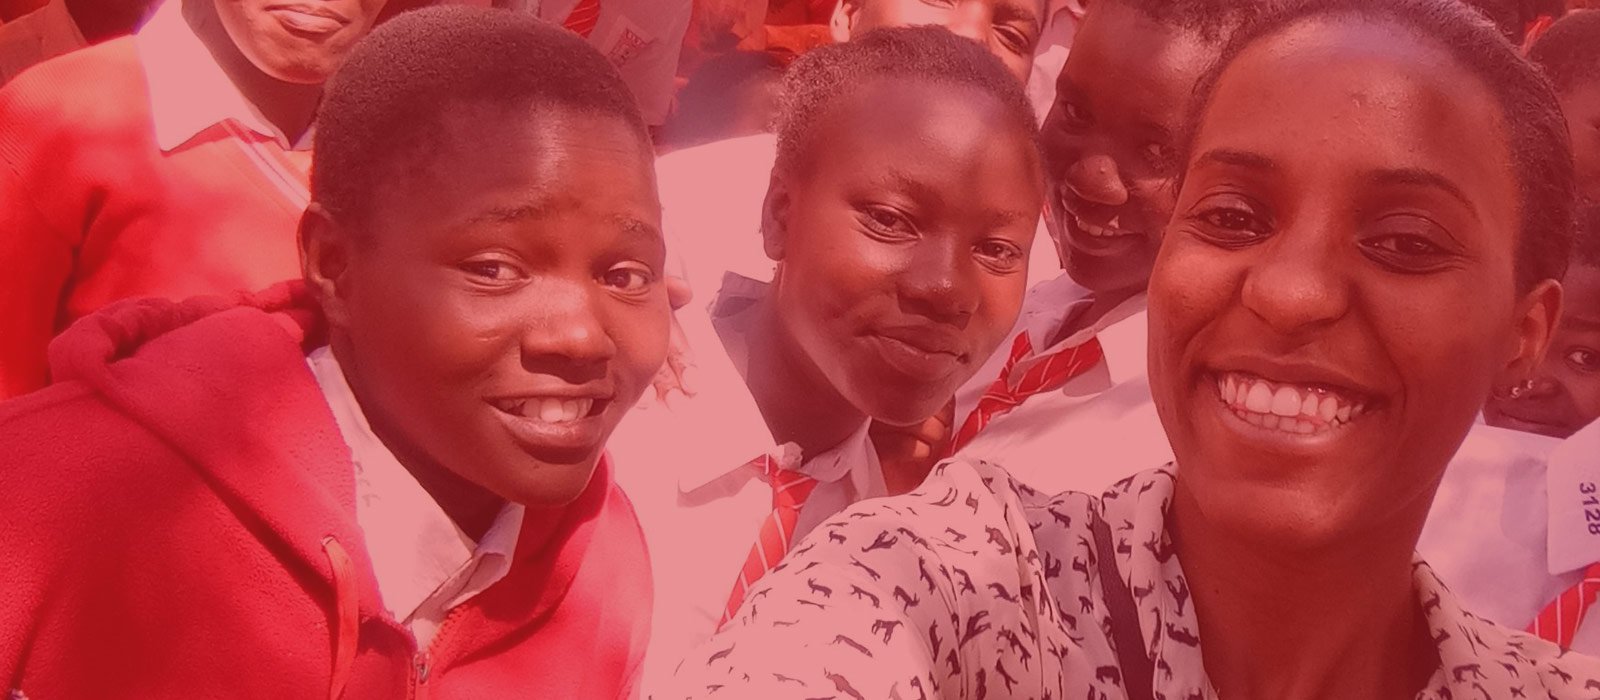 Supporting women technologists + expanding Internet access in Kenya